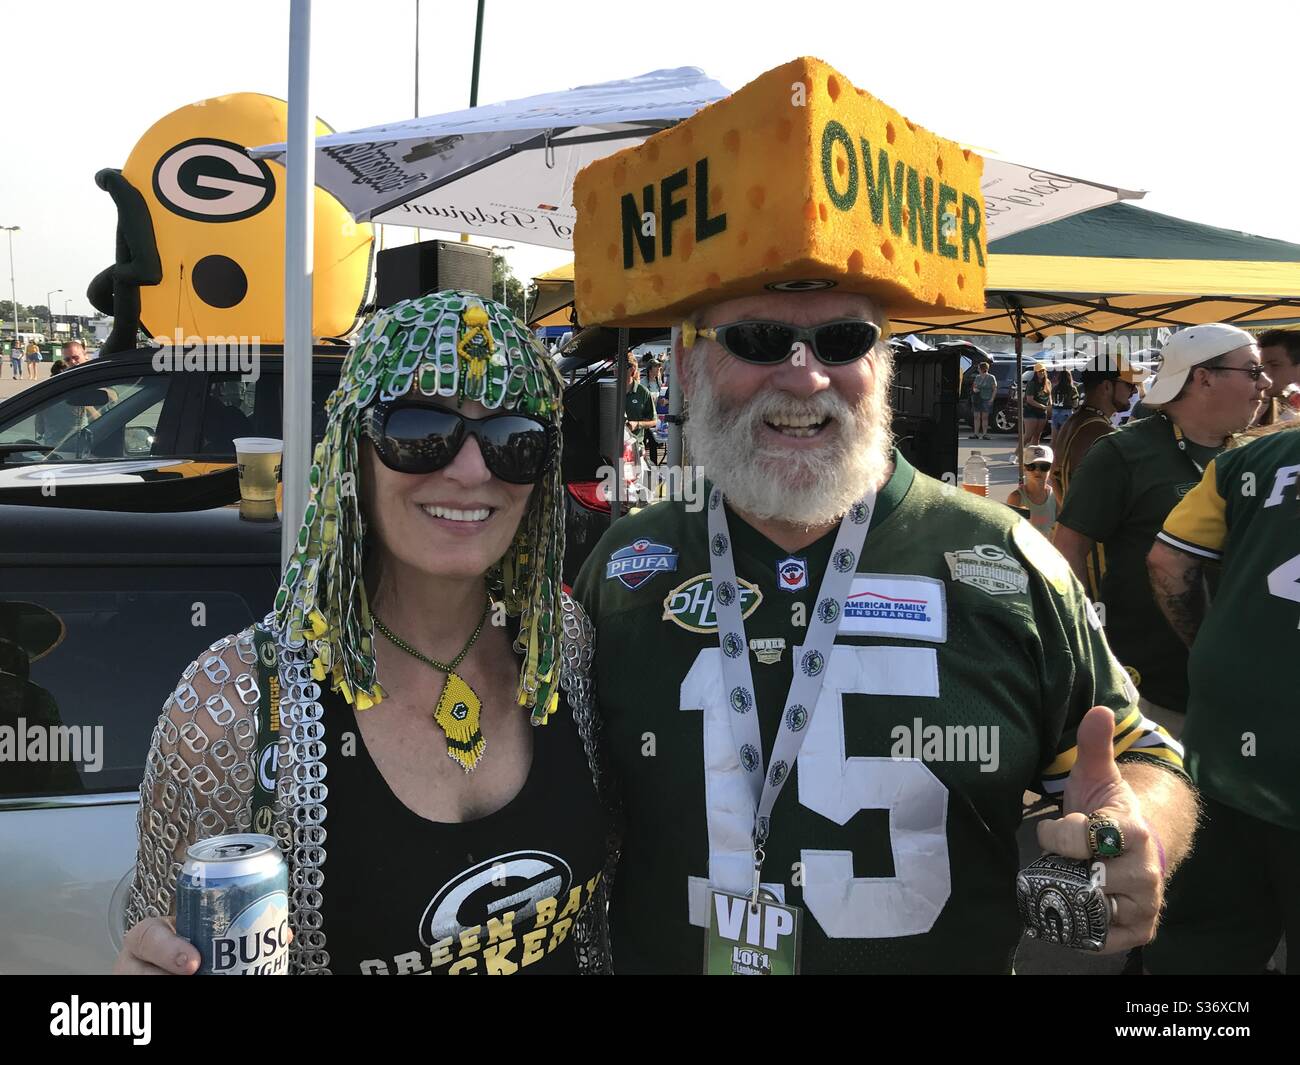 Green Bay, Wisconsin/USA. August 9th, 2018. Two Packer fans tailgate before a football game in the Lambeau Field parking lot. Stock Photo